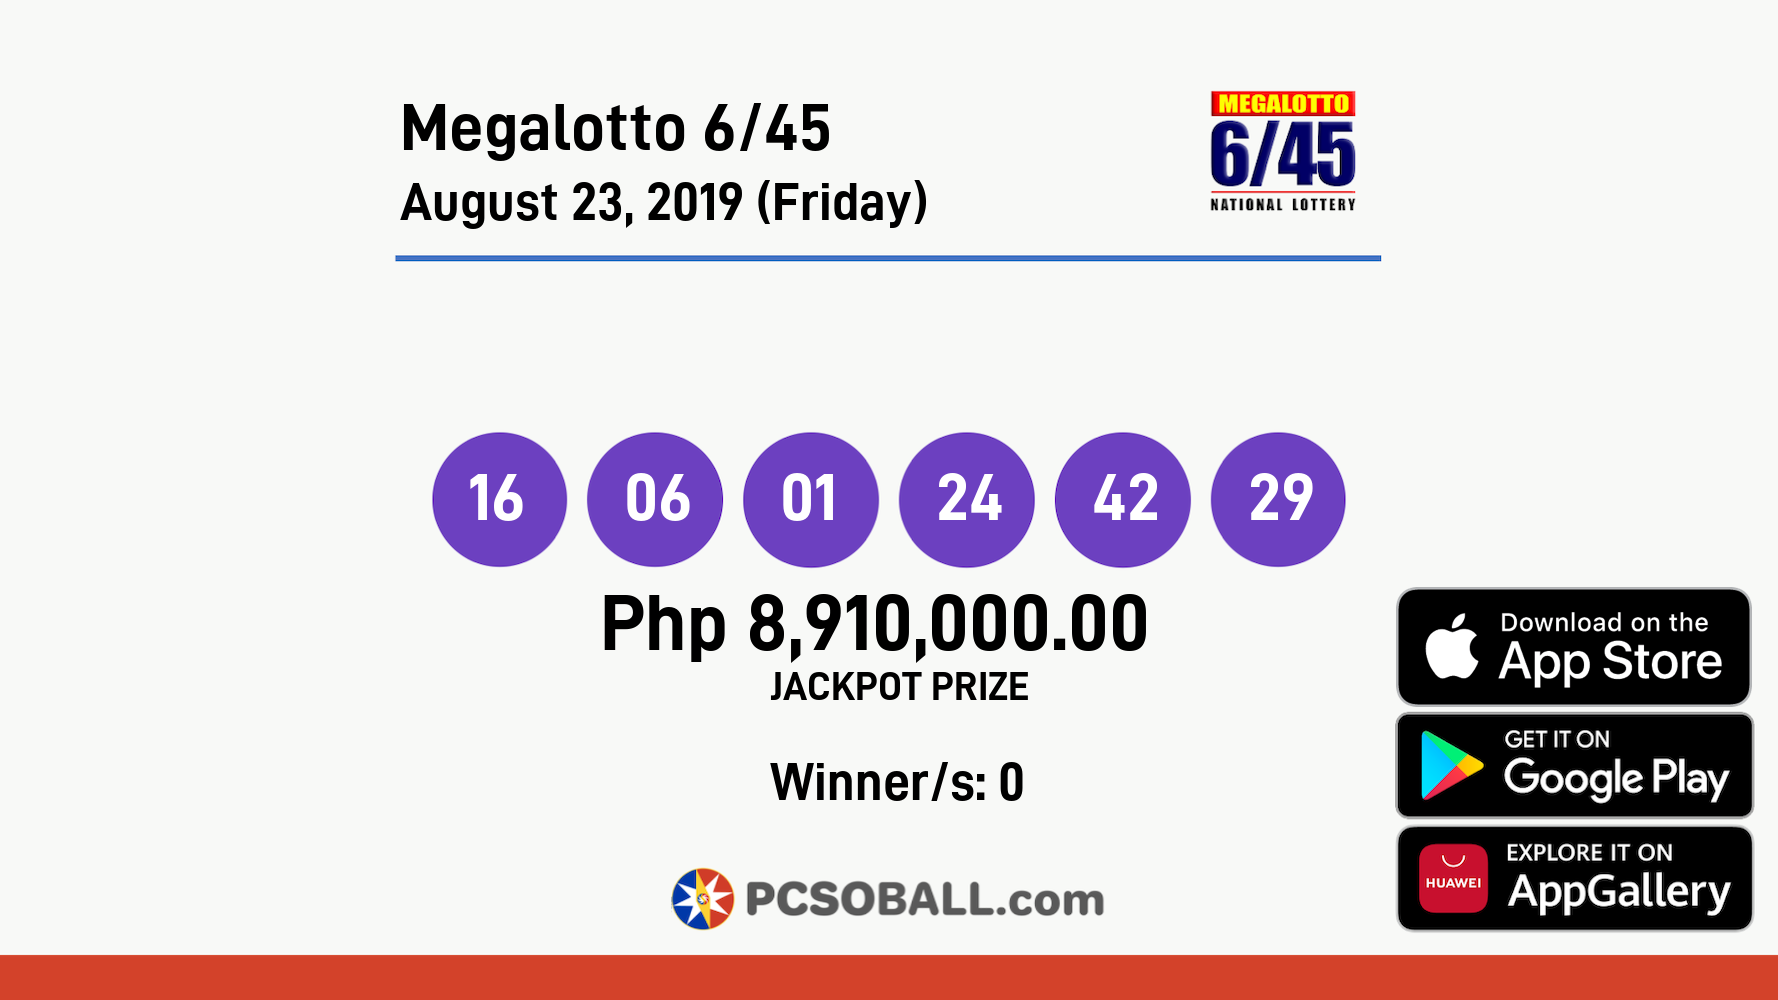 Megalotto 6/45 August 23, 2019 (Friday) Result